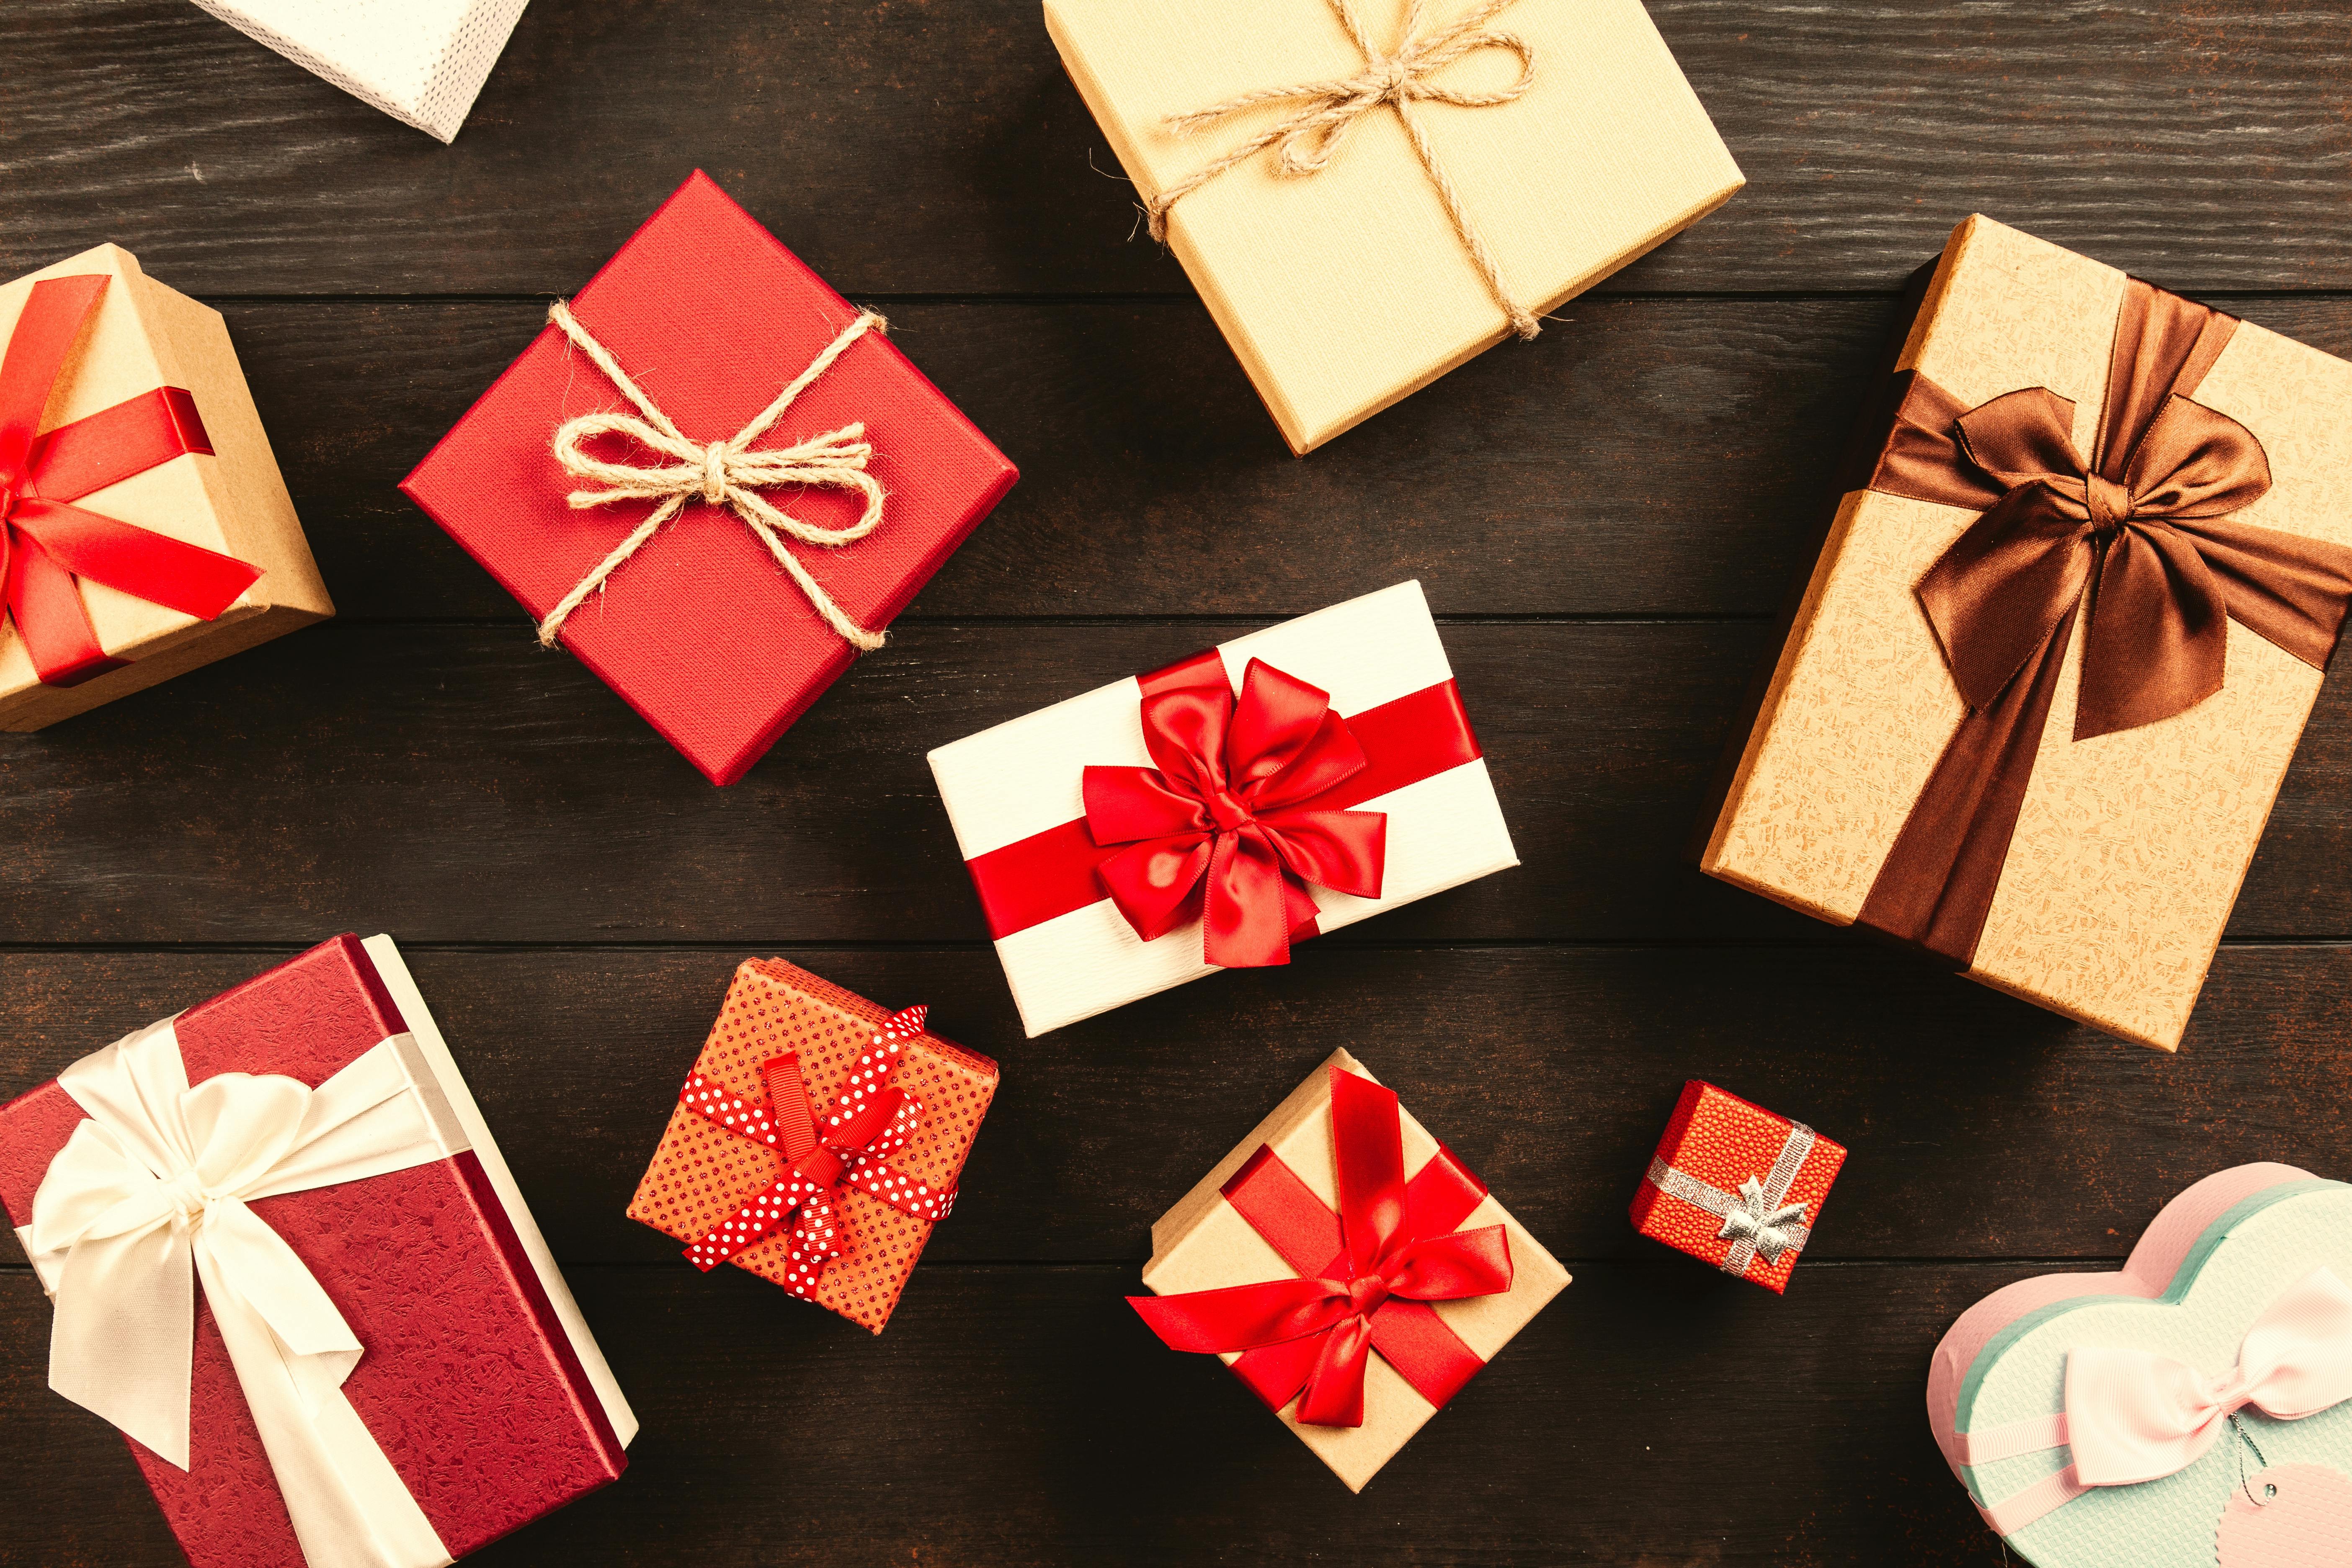 A selection of gifts | Source: Pexels